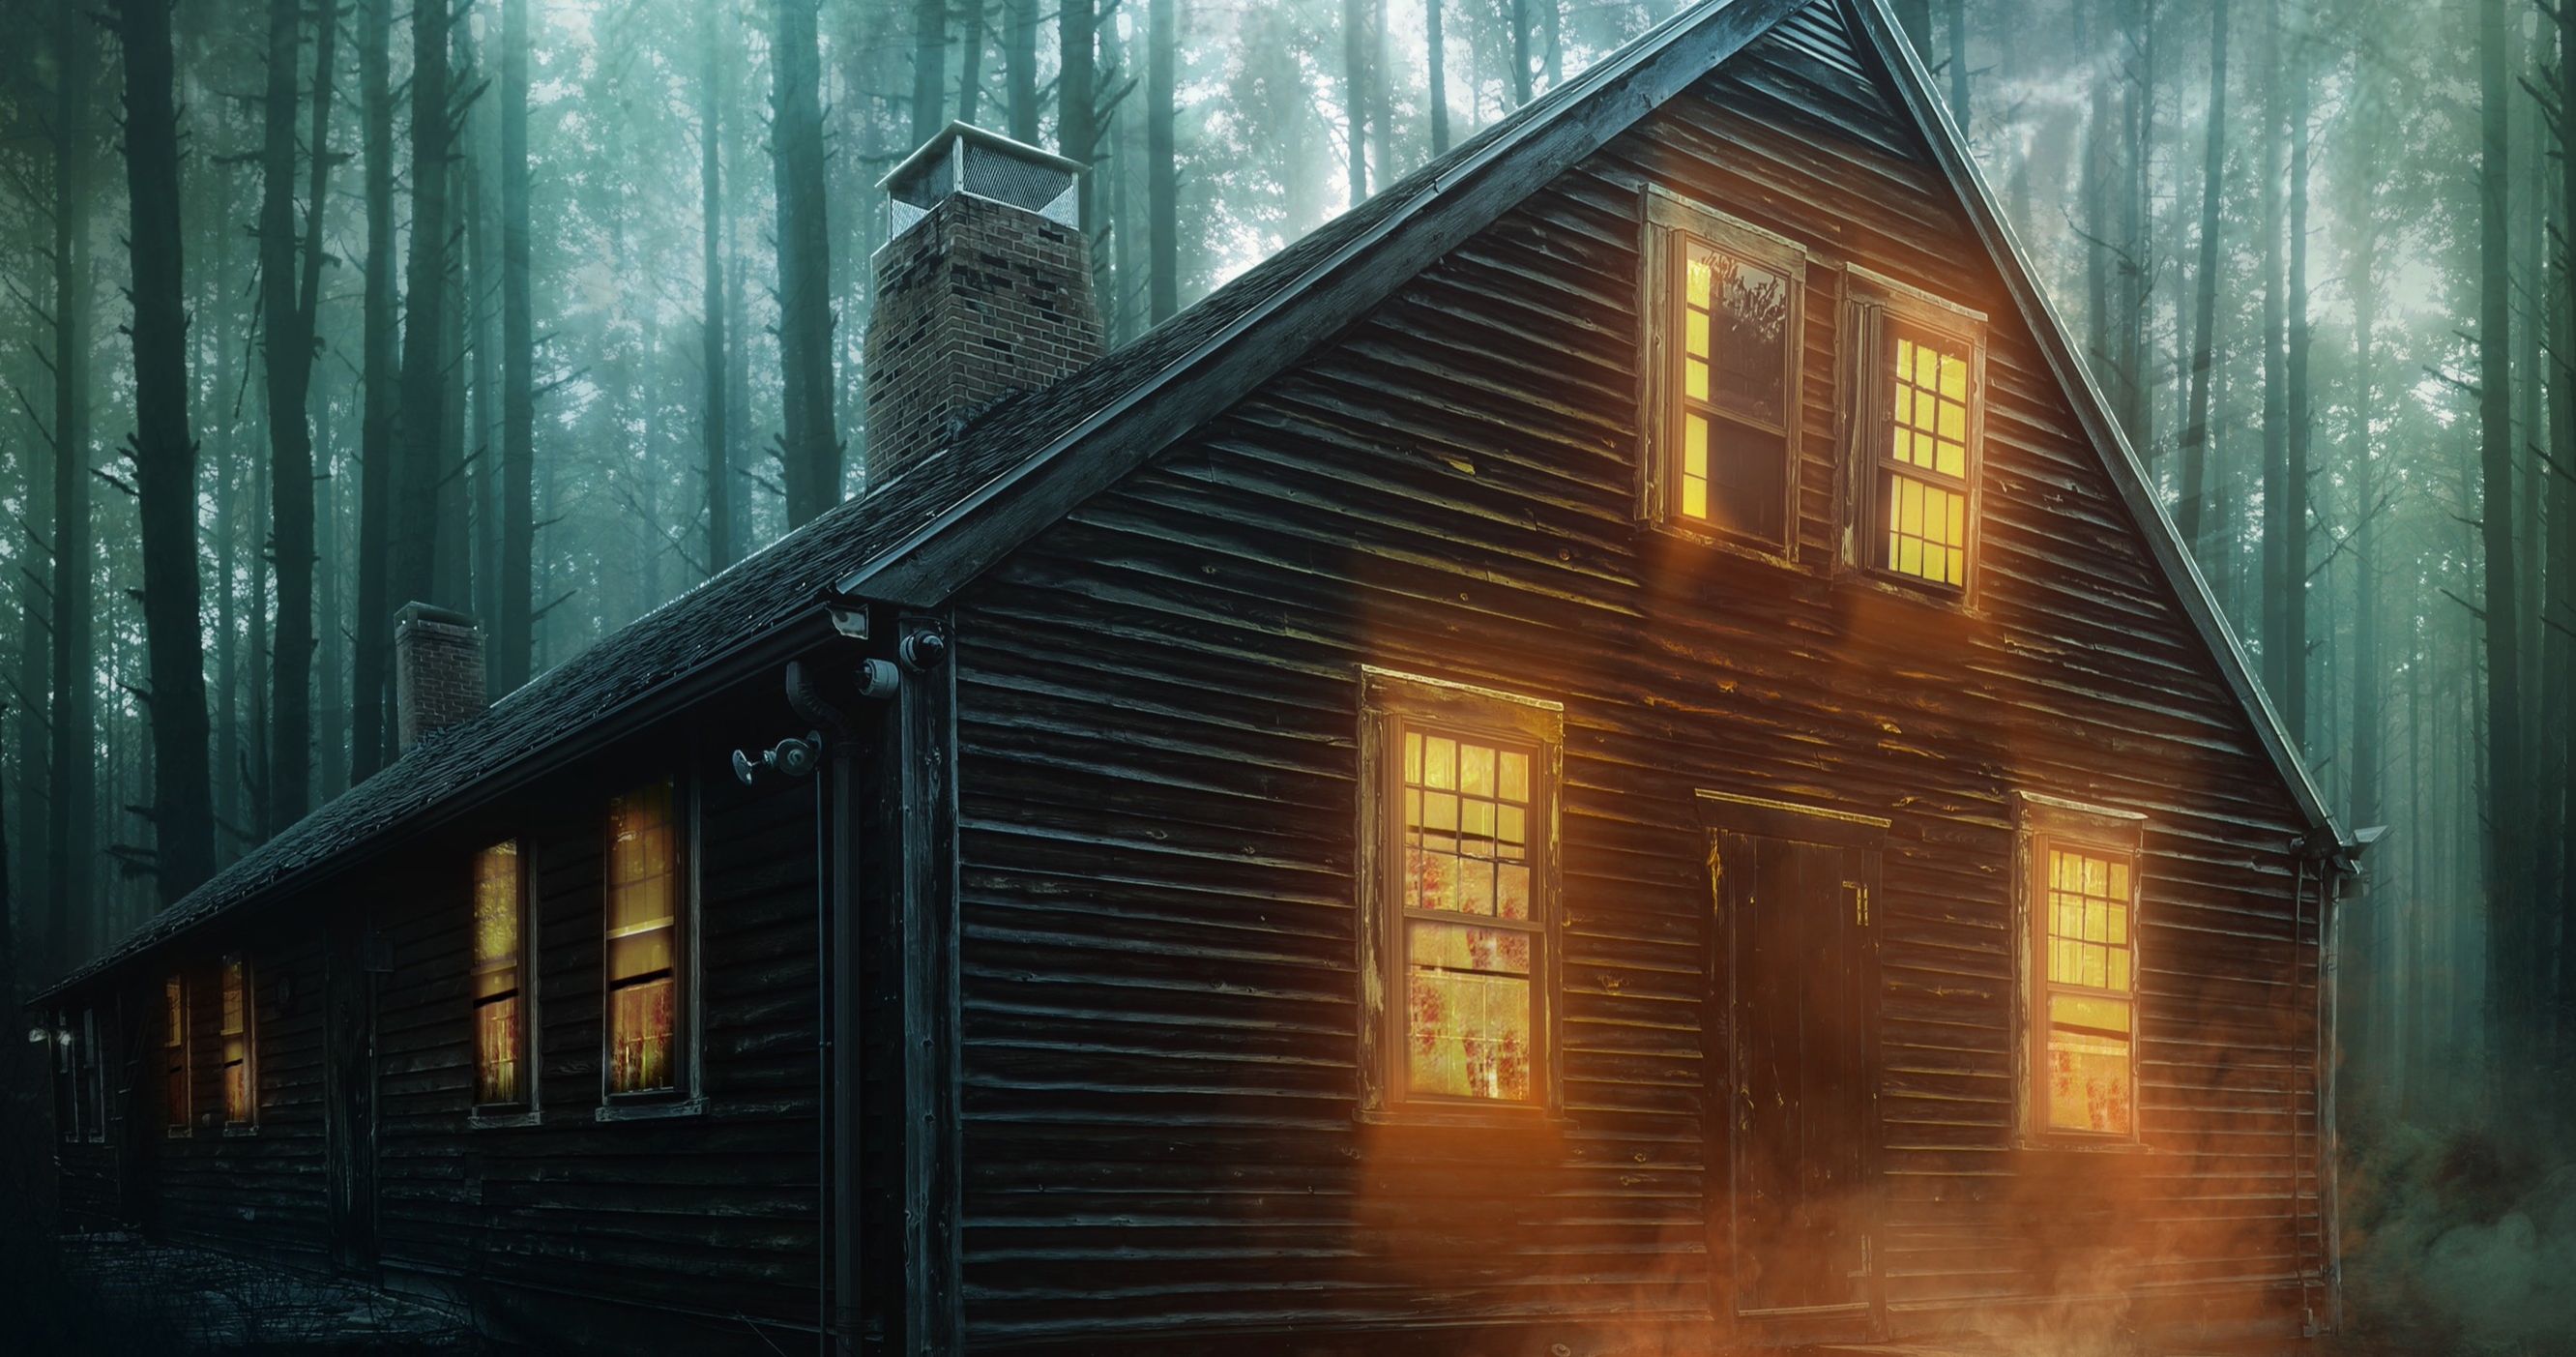 The Conjuring Real-Life Haunted House Can Be Yours for a Cool $1.2 Million